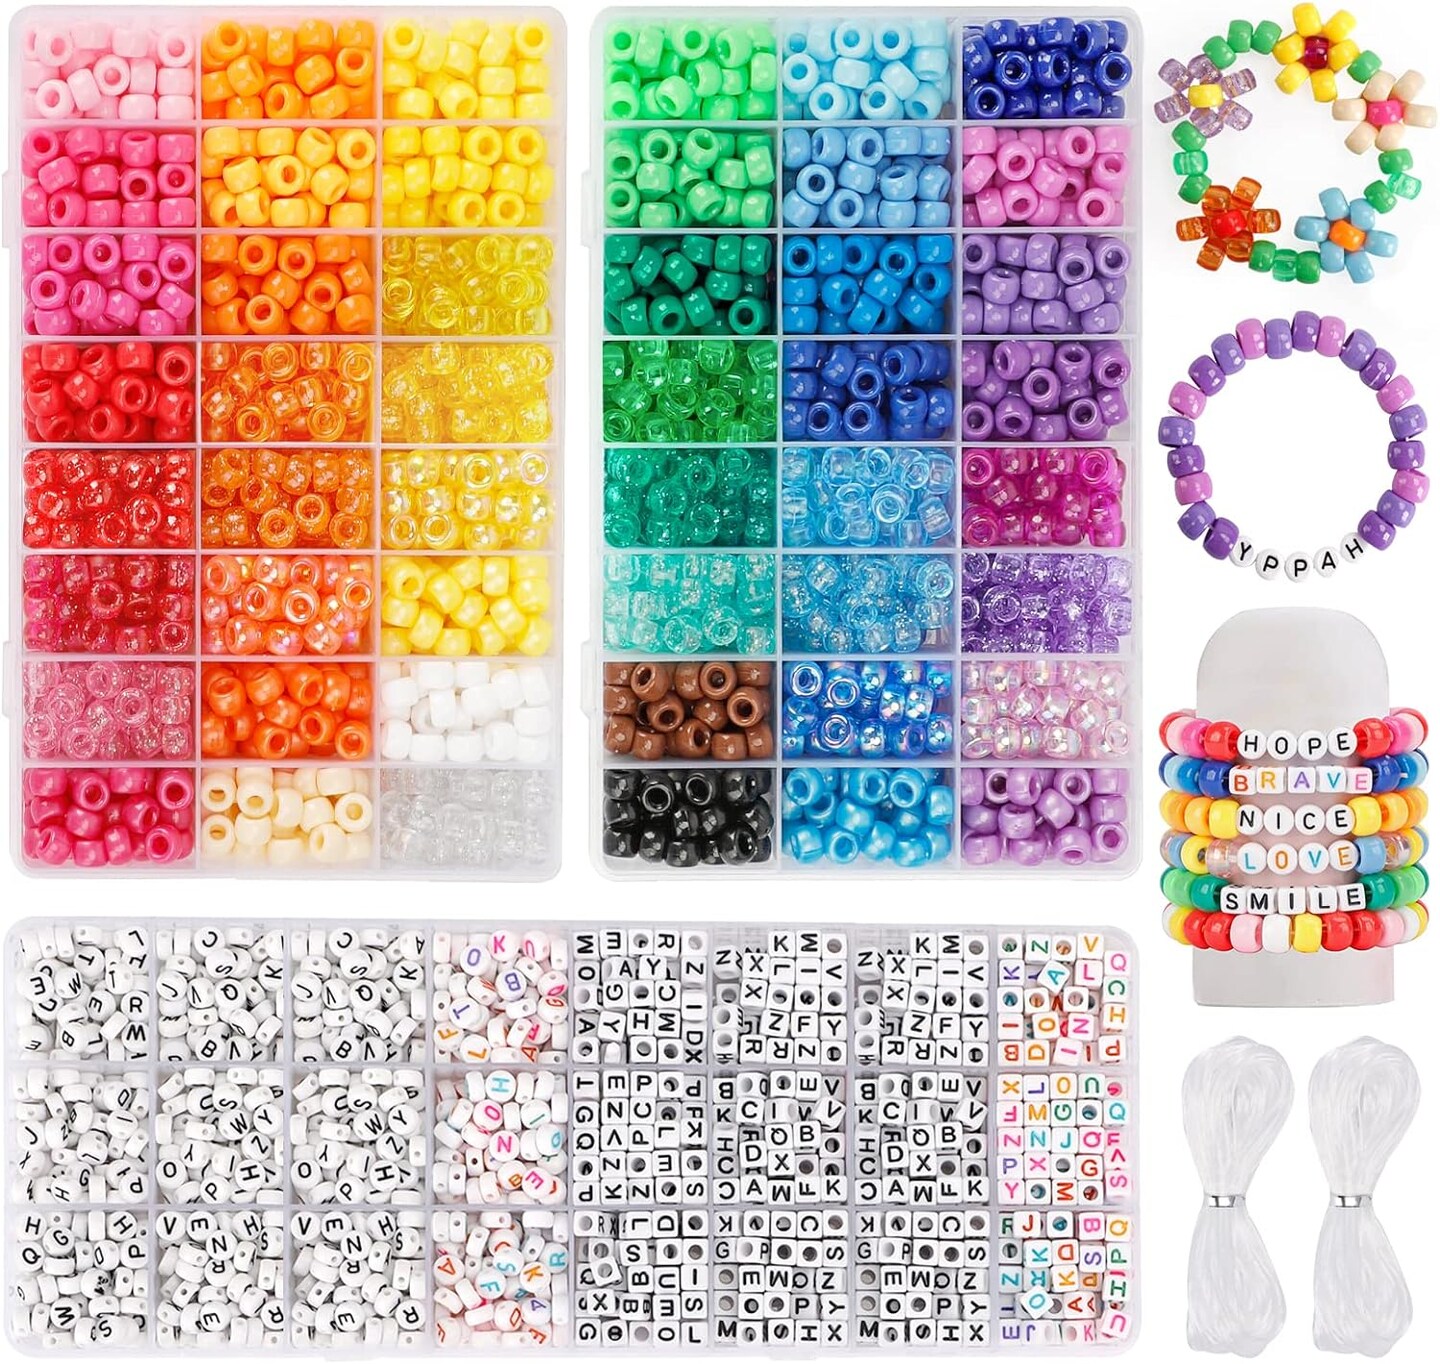 3960pcs Pony Beads for Friendship Bracelet Making Kit 48 Colors Kandi Beads Set, 2400pcs Plastic Rainbow Bulk and 1560pcs Letter Beads with 20 Meter Elastic Threads for Craft Jewelry Necklace